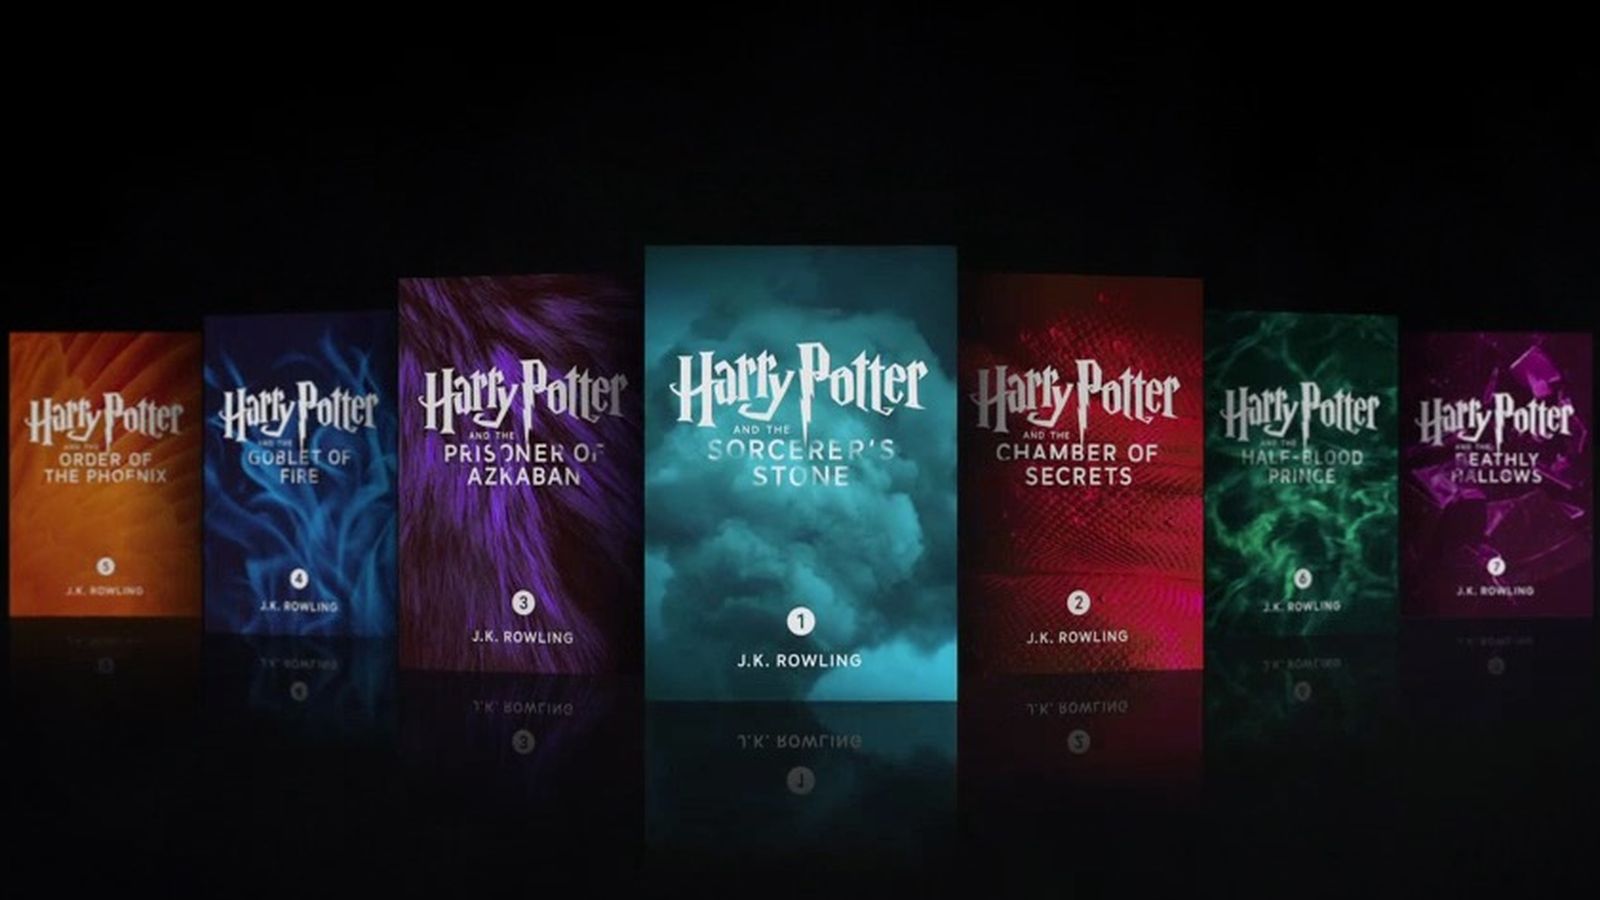 Can I read the Harry Potter books on a Mac?